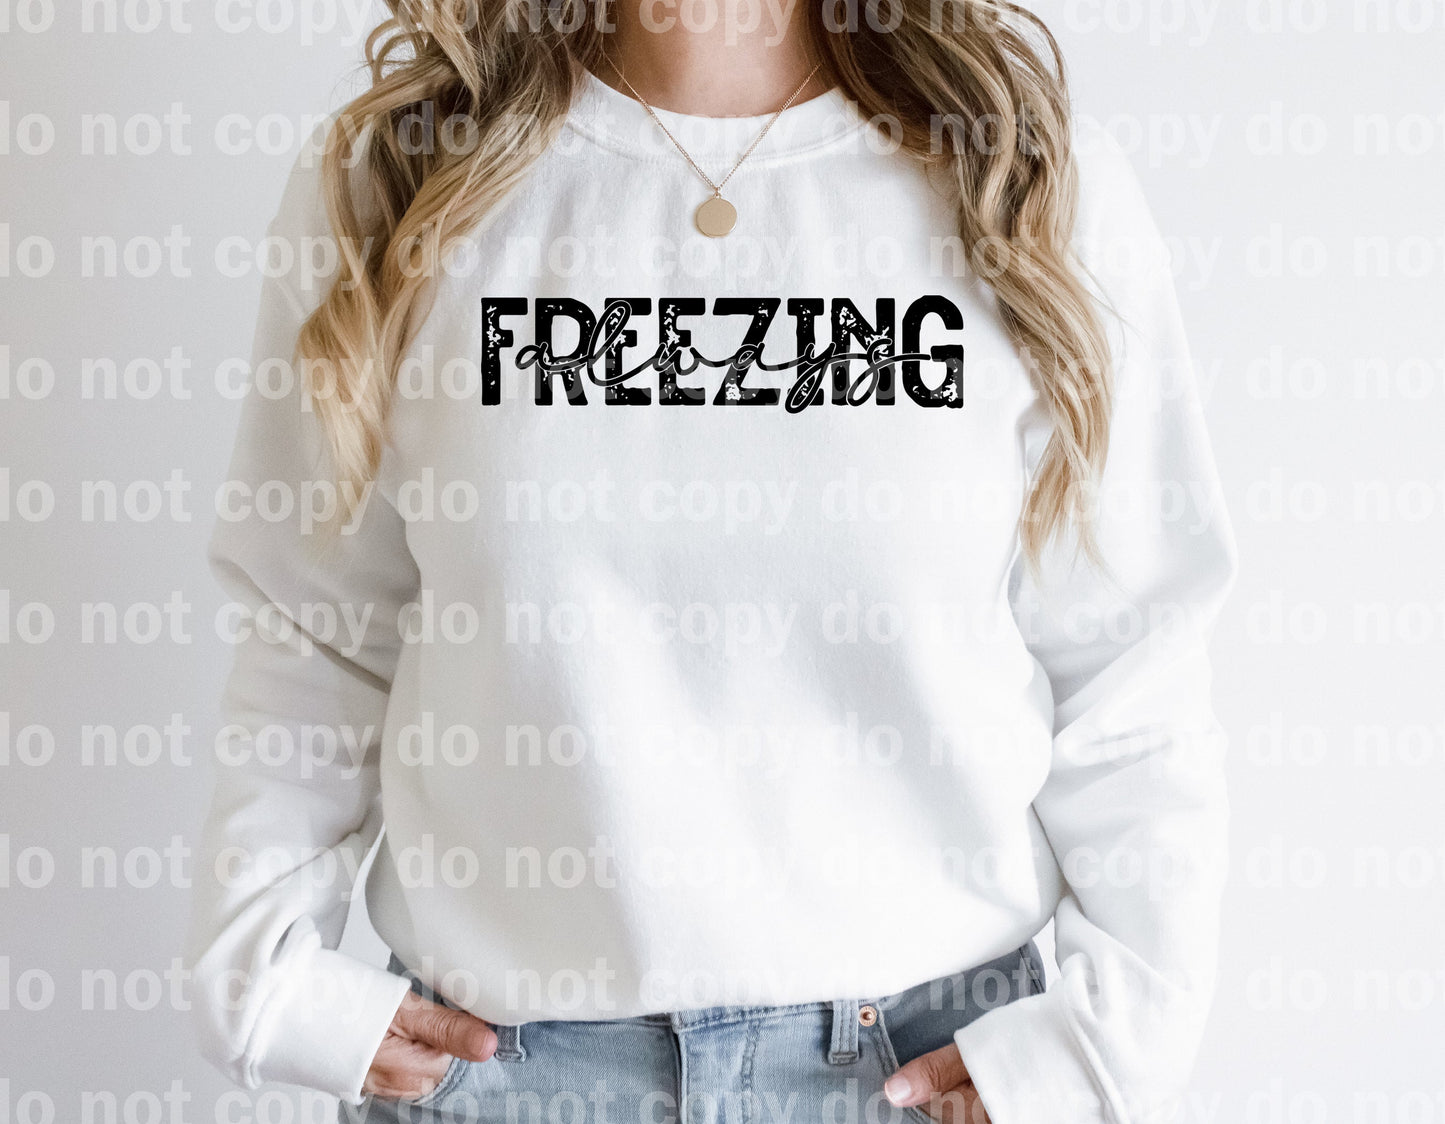 Always Freezing Full Color/One Color Dream Print or Sublimation Print